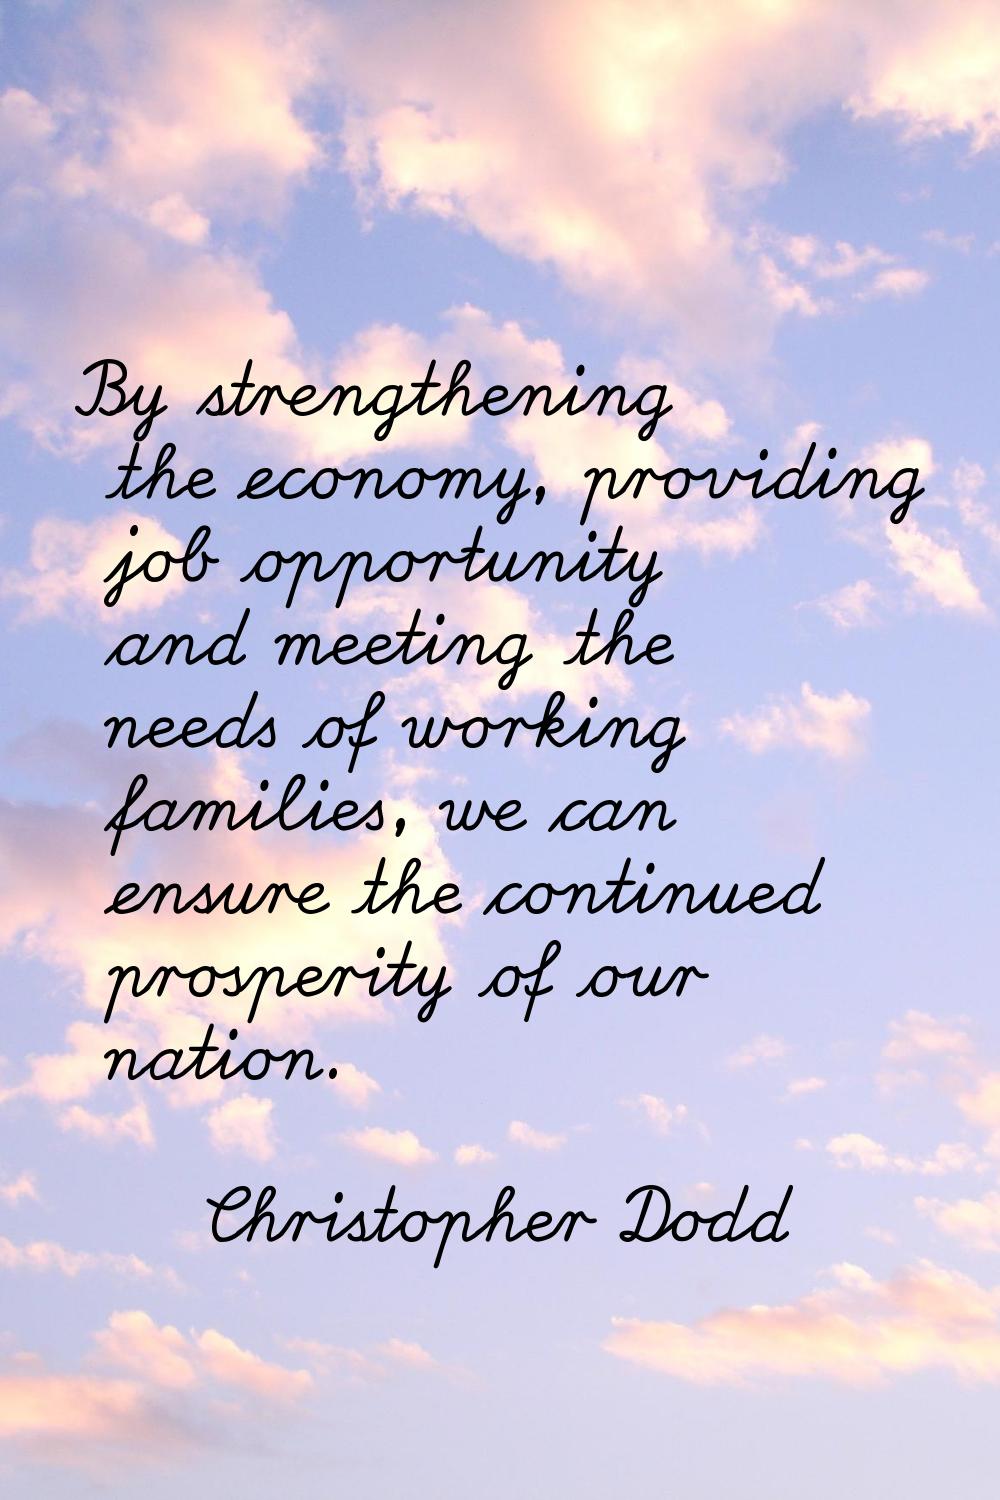 By strengthening the economy, providing job opportunity and meeting the needs of working families, 